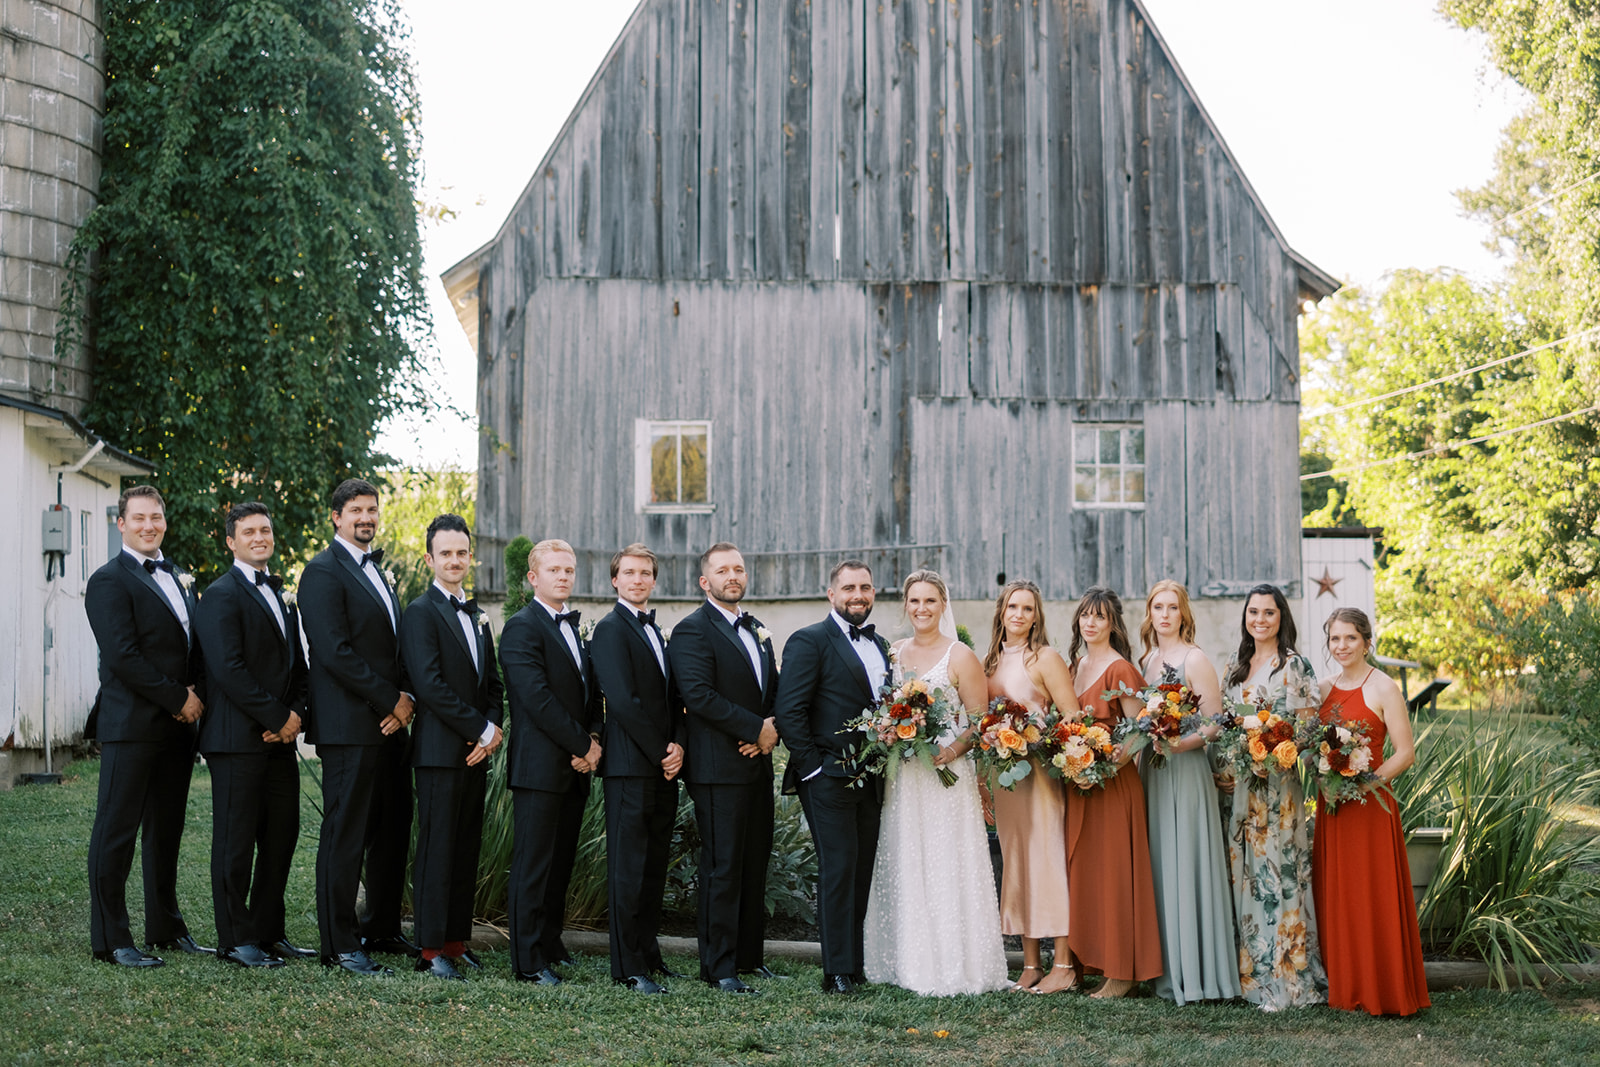 Wedding party portrait in front of old barn at The Barns at Hamilton Station